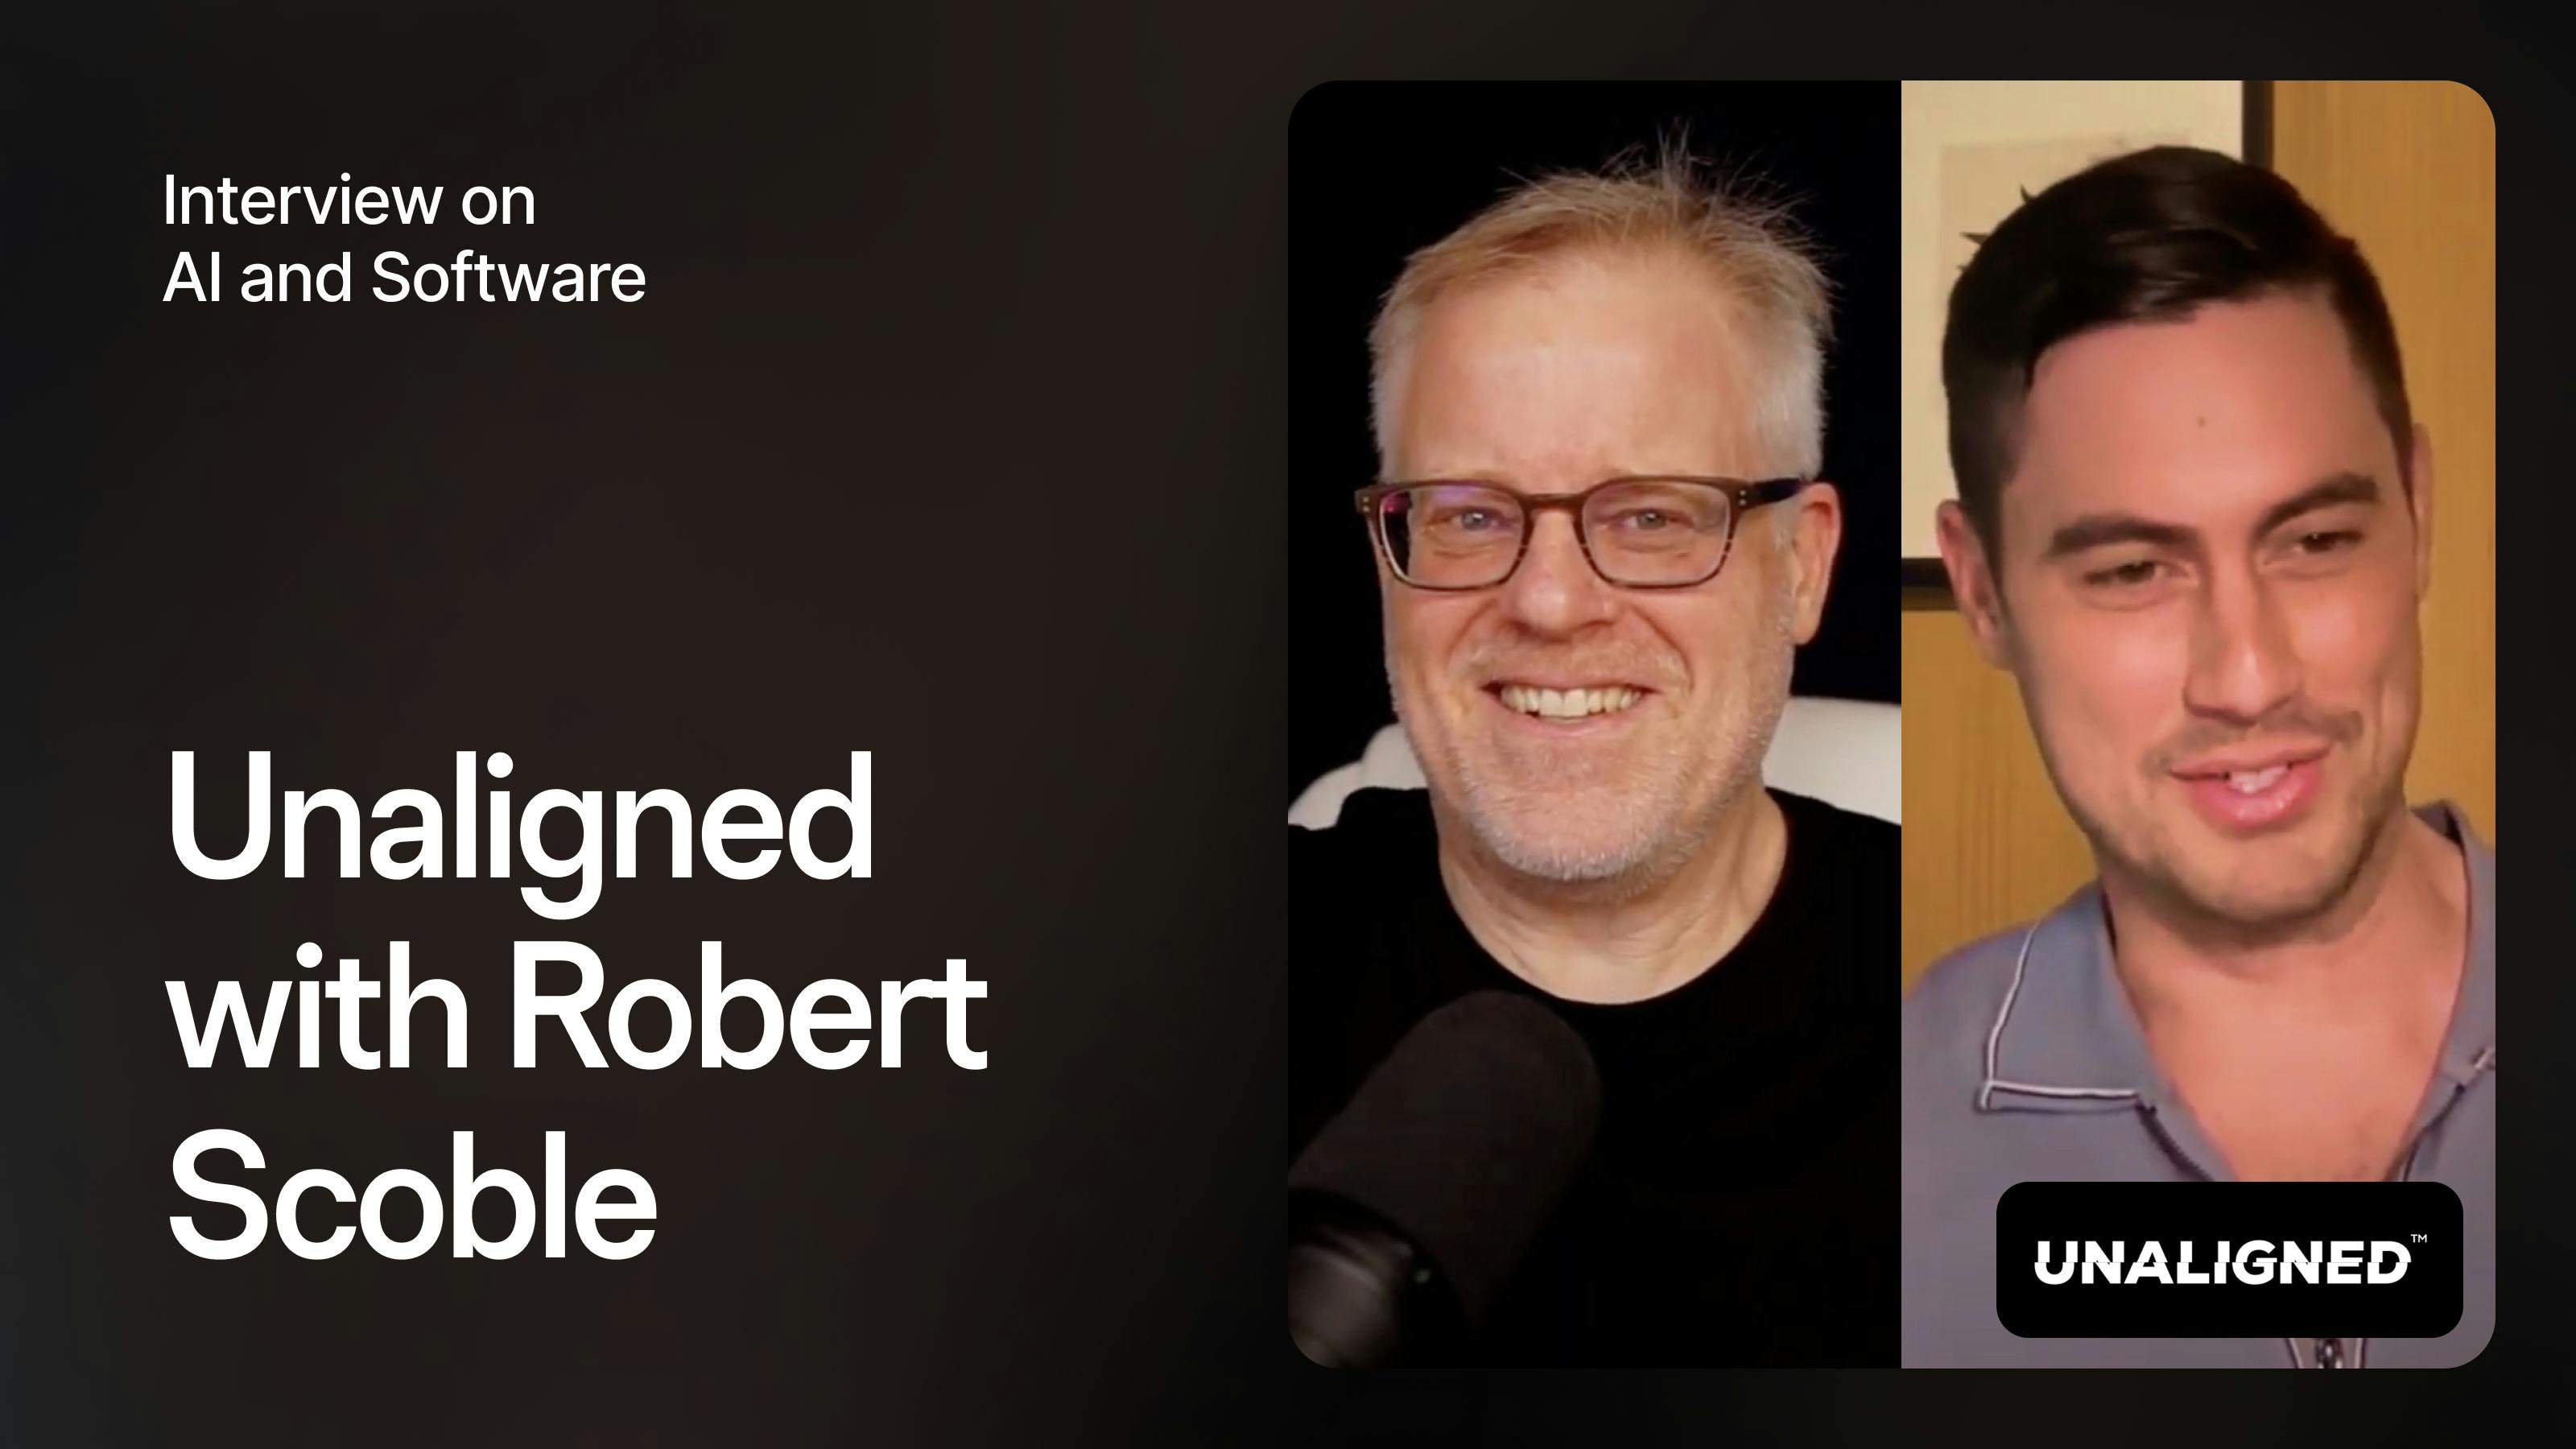 Unaligned with Robert Scoble: Glide, codeless software development with AI